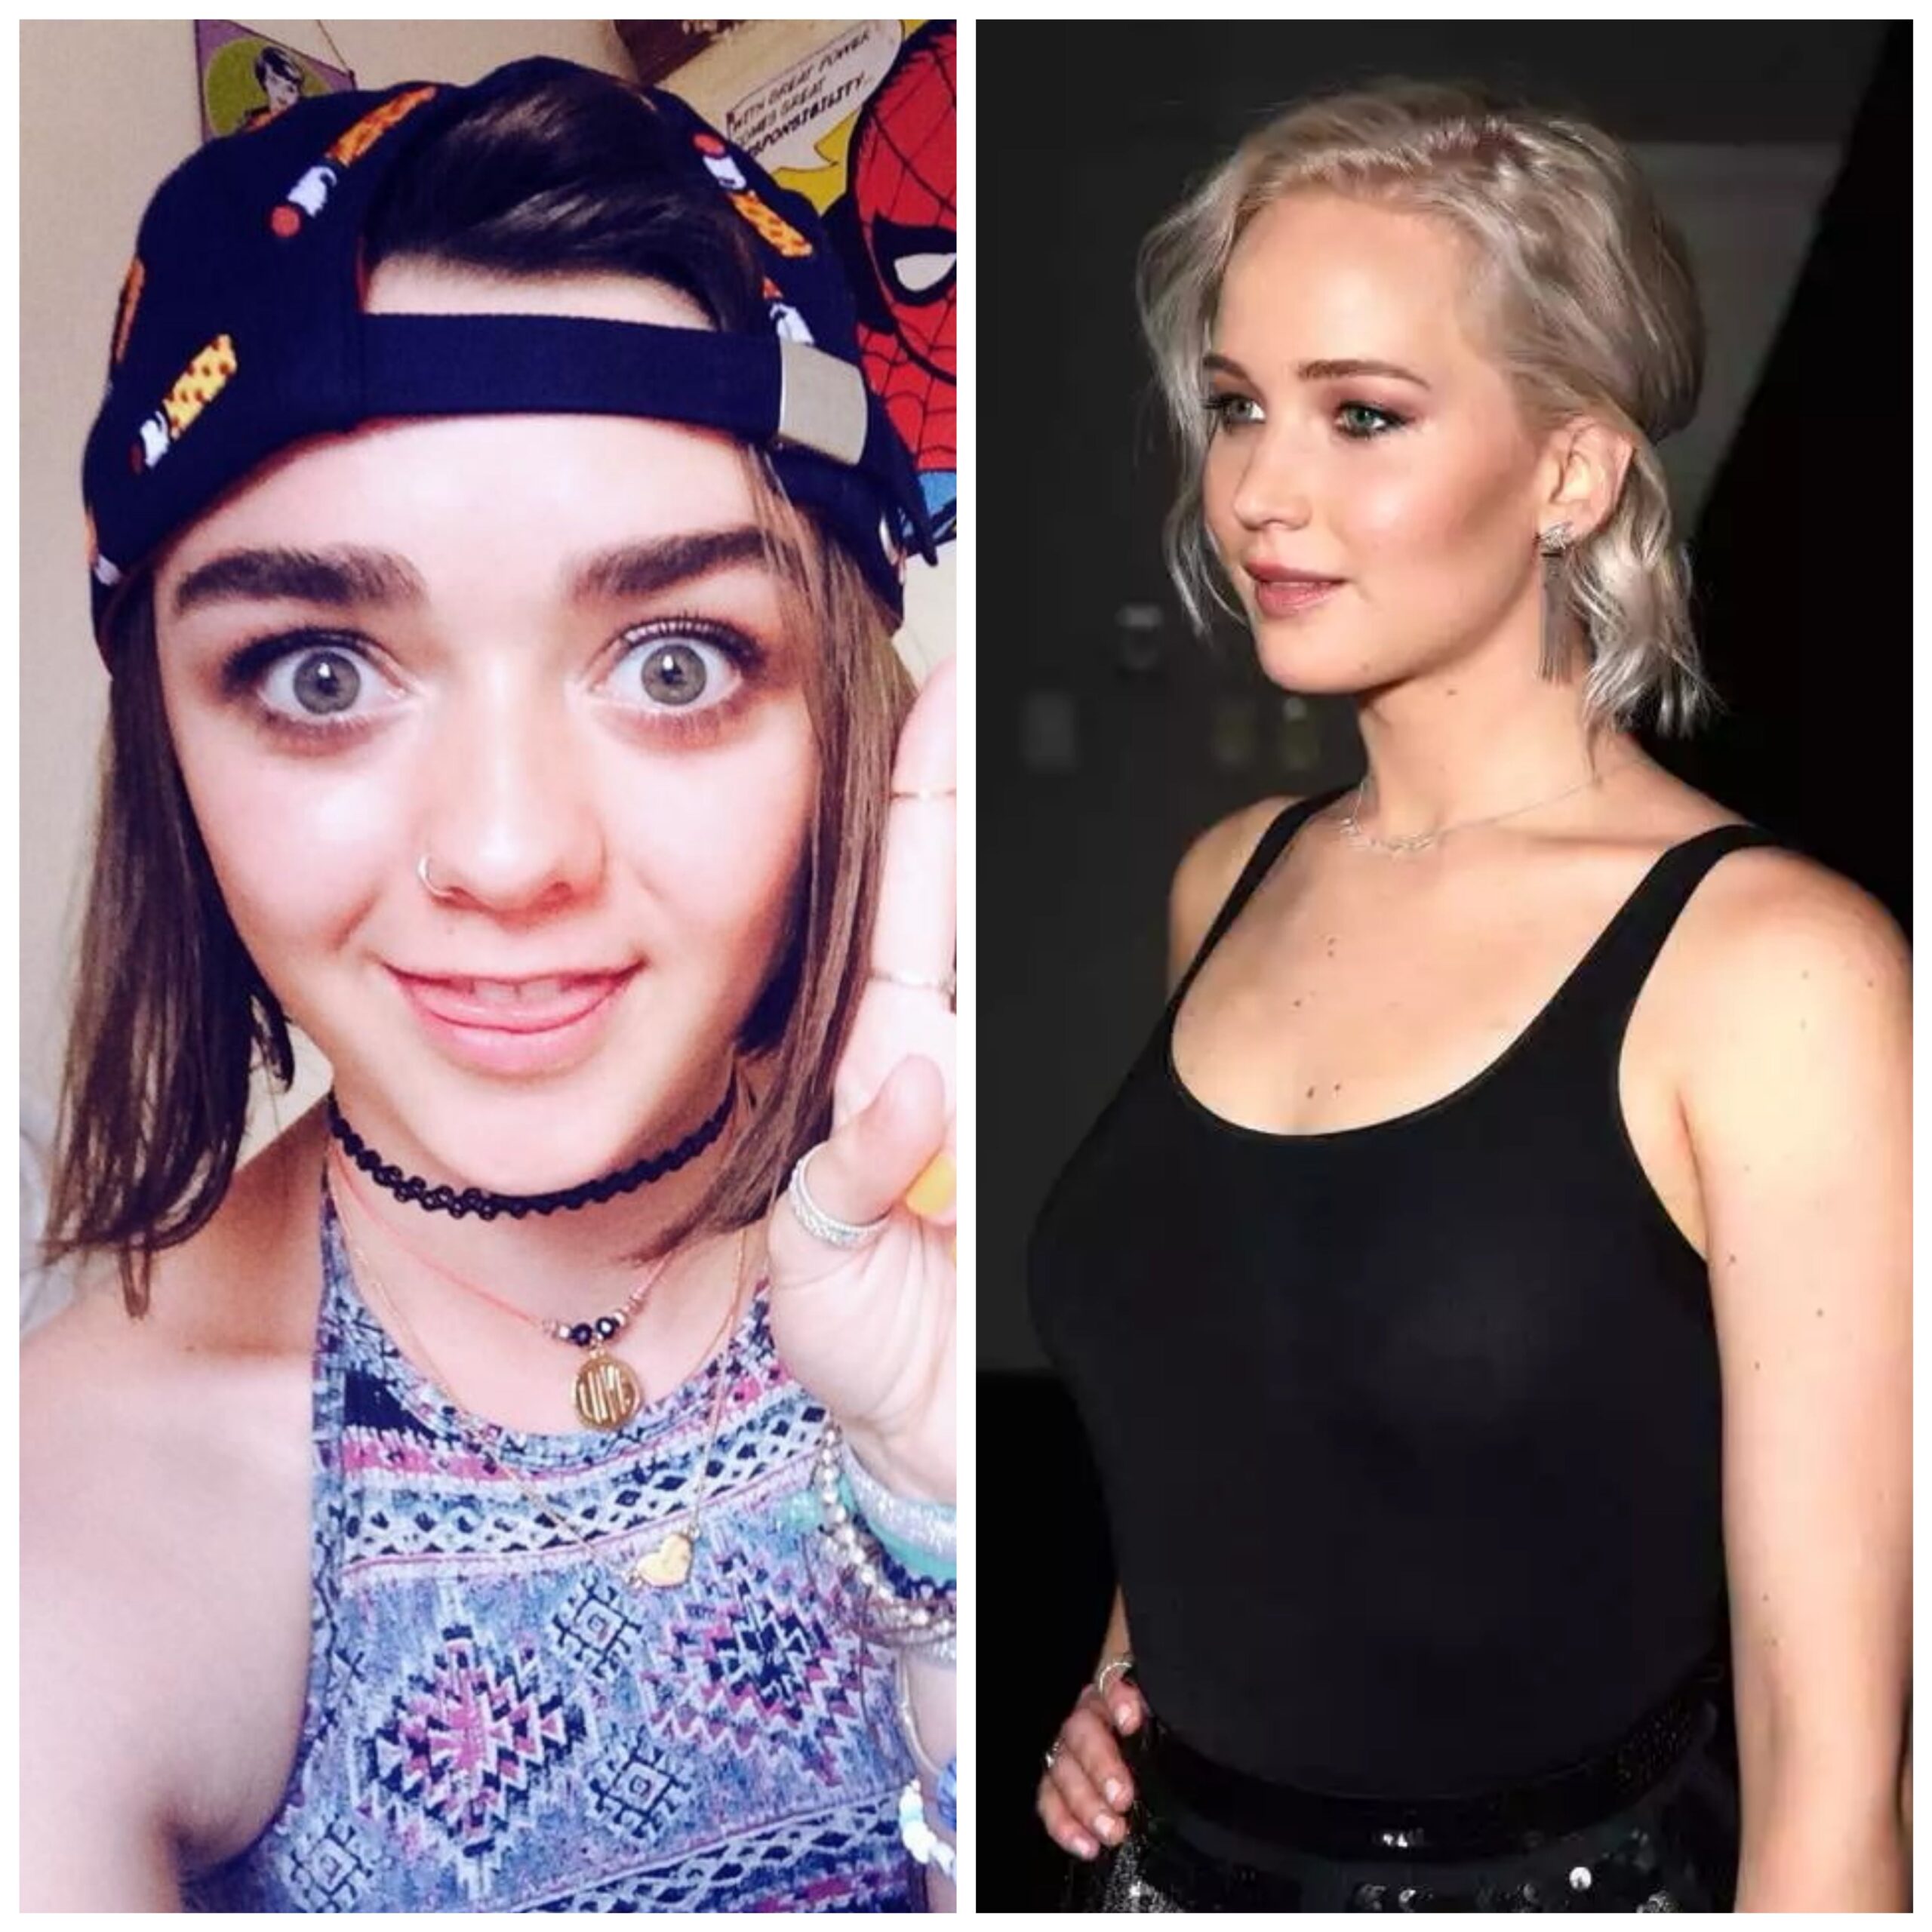 Any hung buds for Maisie Williams or Jennifer Lawrence